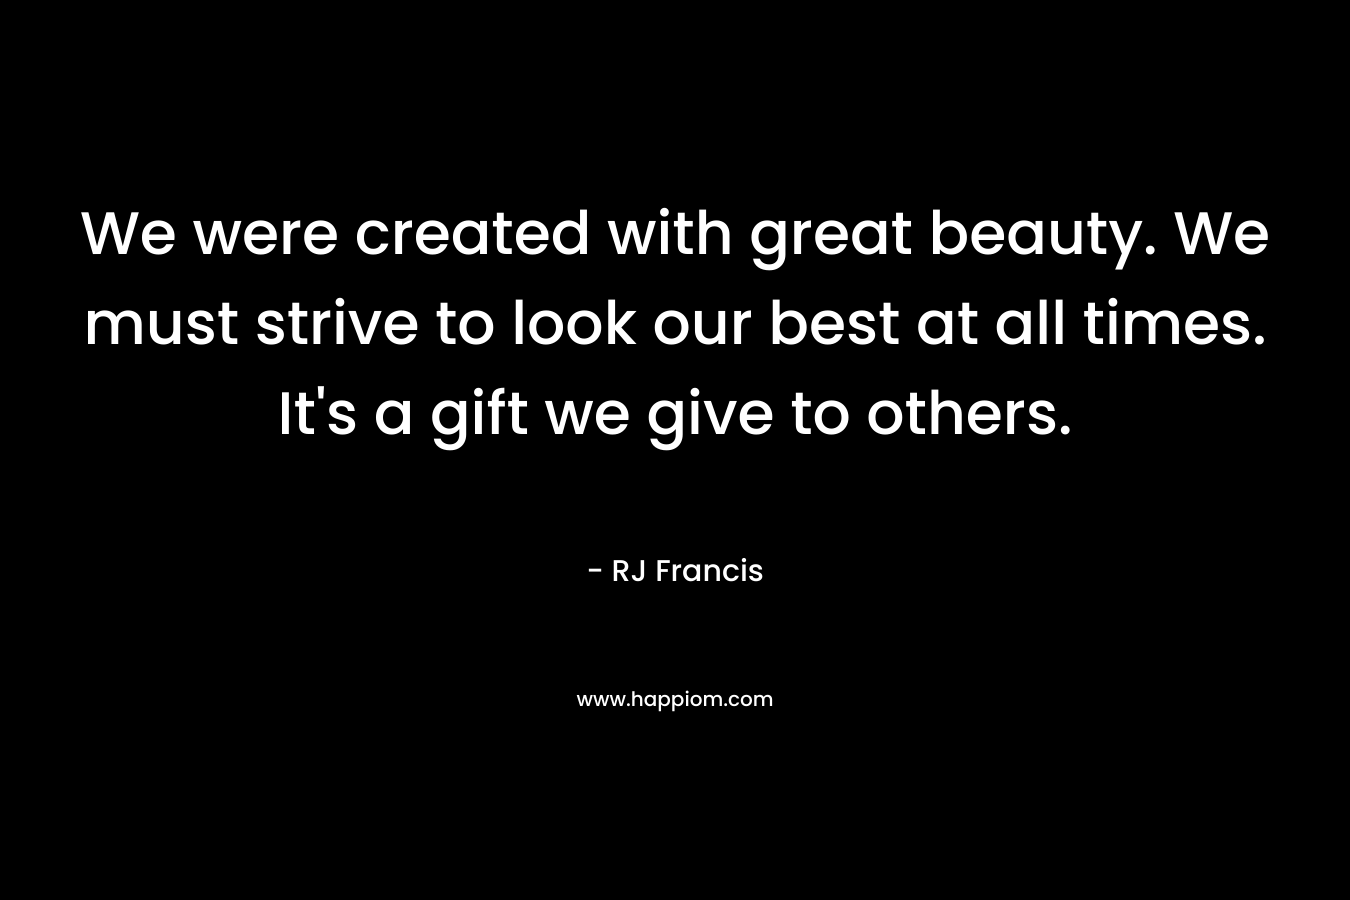 We were created with great beauty. We must strive to look our best at all times. It’s a gift we give to others. – RJ Francis